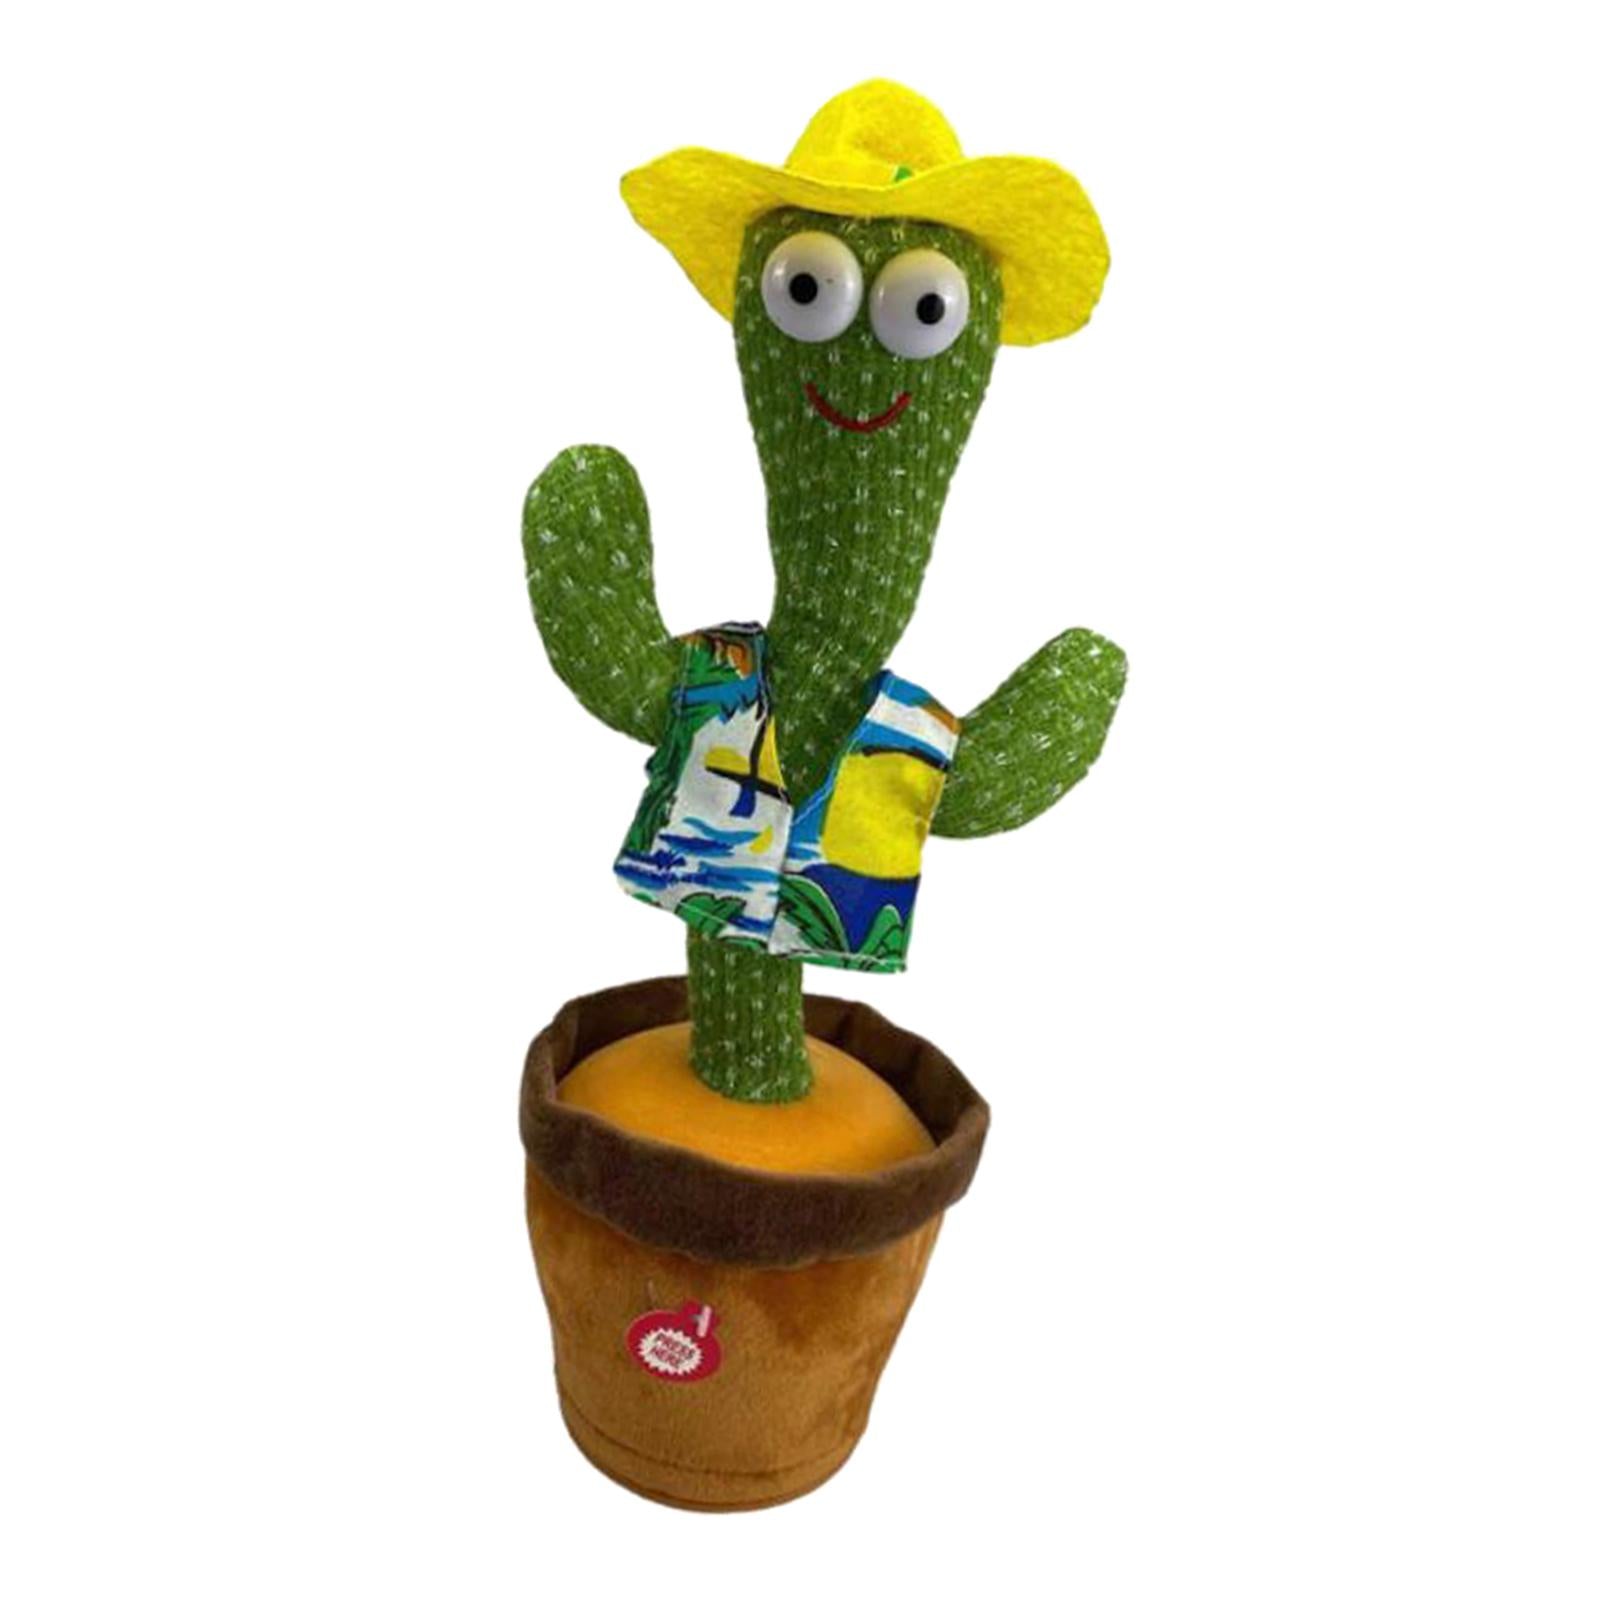 Funny Potted Dancing Cactus Plush Toy Swing Home Tabletop Decor Party Favors Hawaii 120 Songs